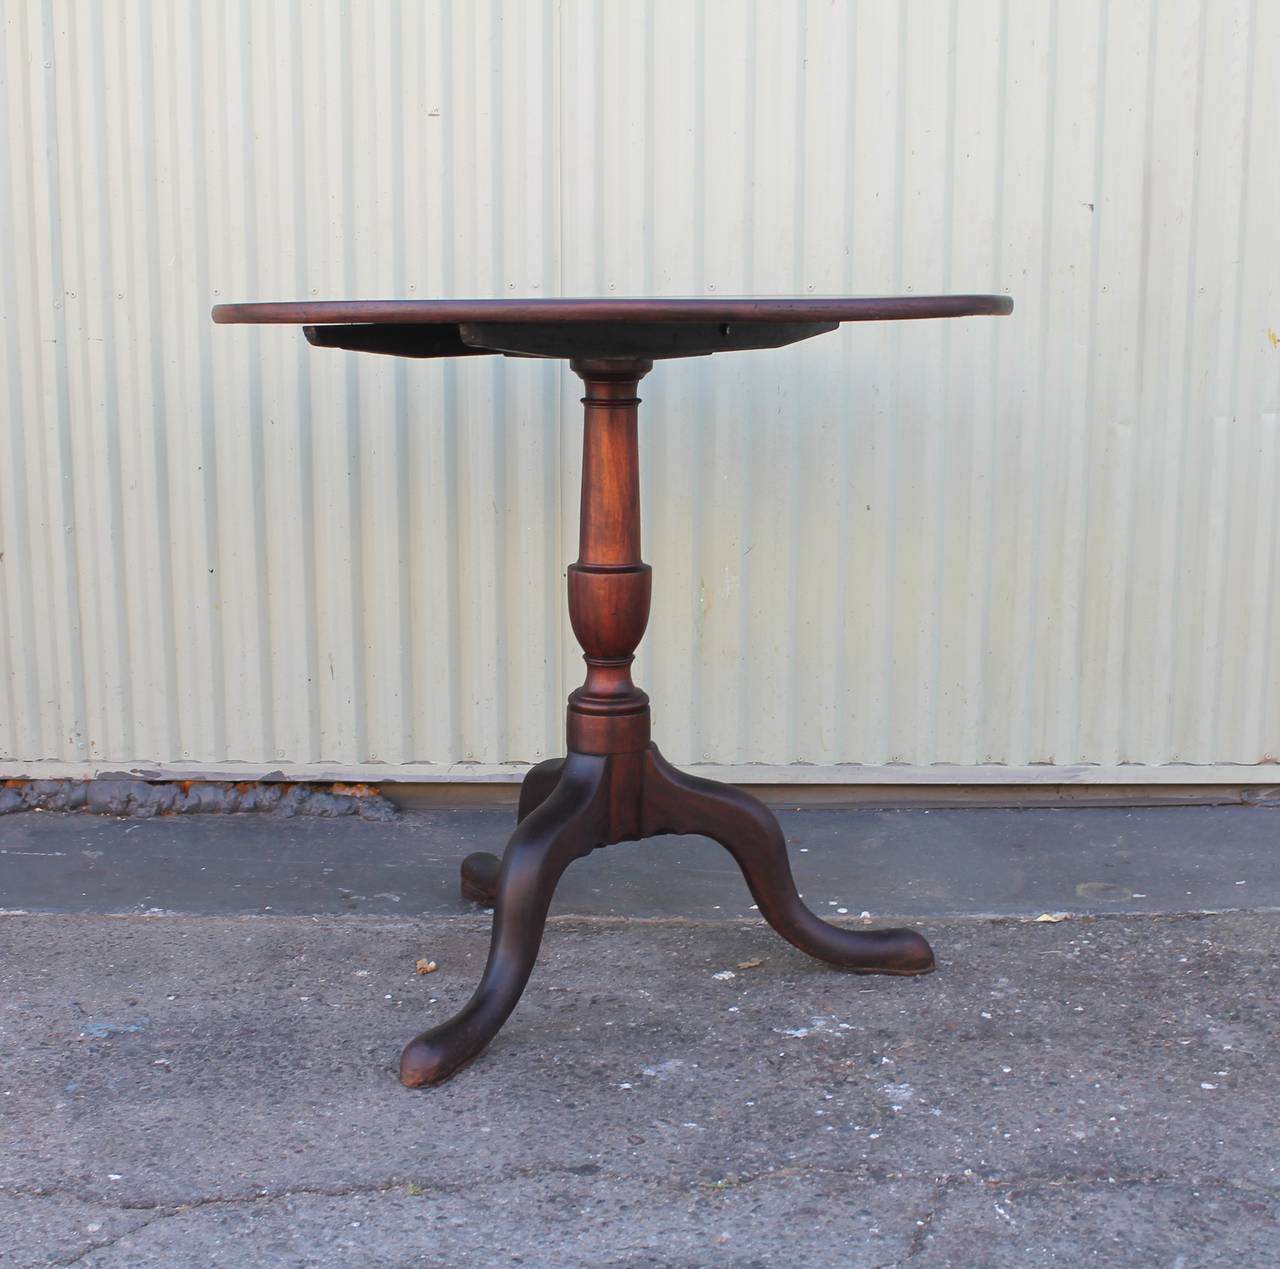 Early 18th century New England Queen Anne stationary lift top table. This table is walnut table has wonderful hand-carved snake legs and was made to be stationary for more sturdy support. The underside of this table has an old worn patina. Of course